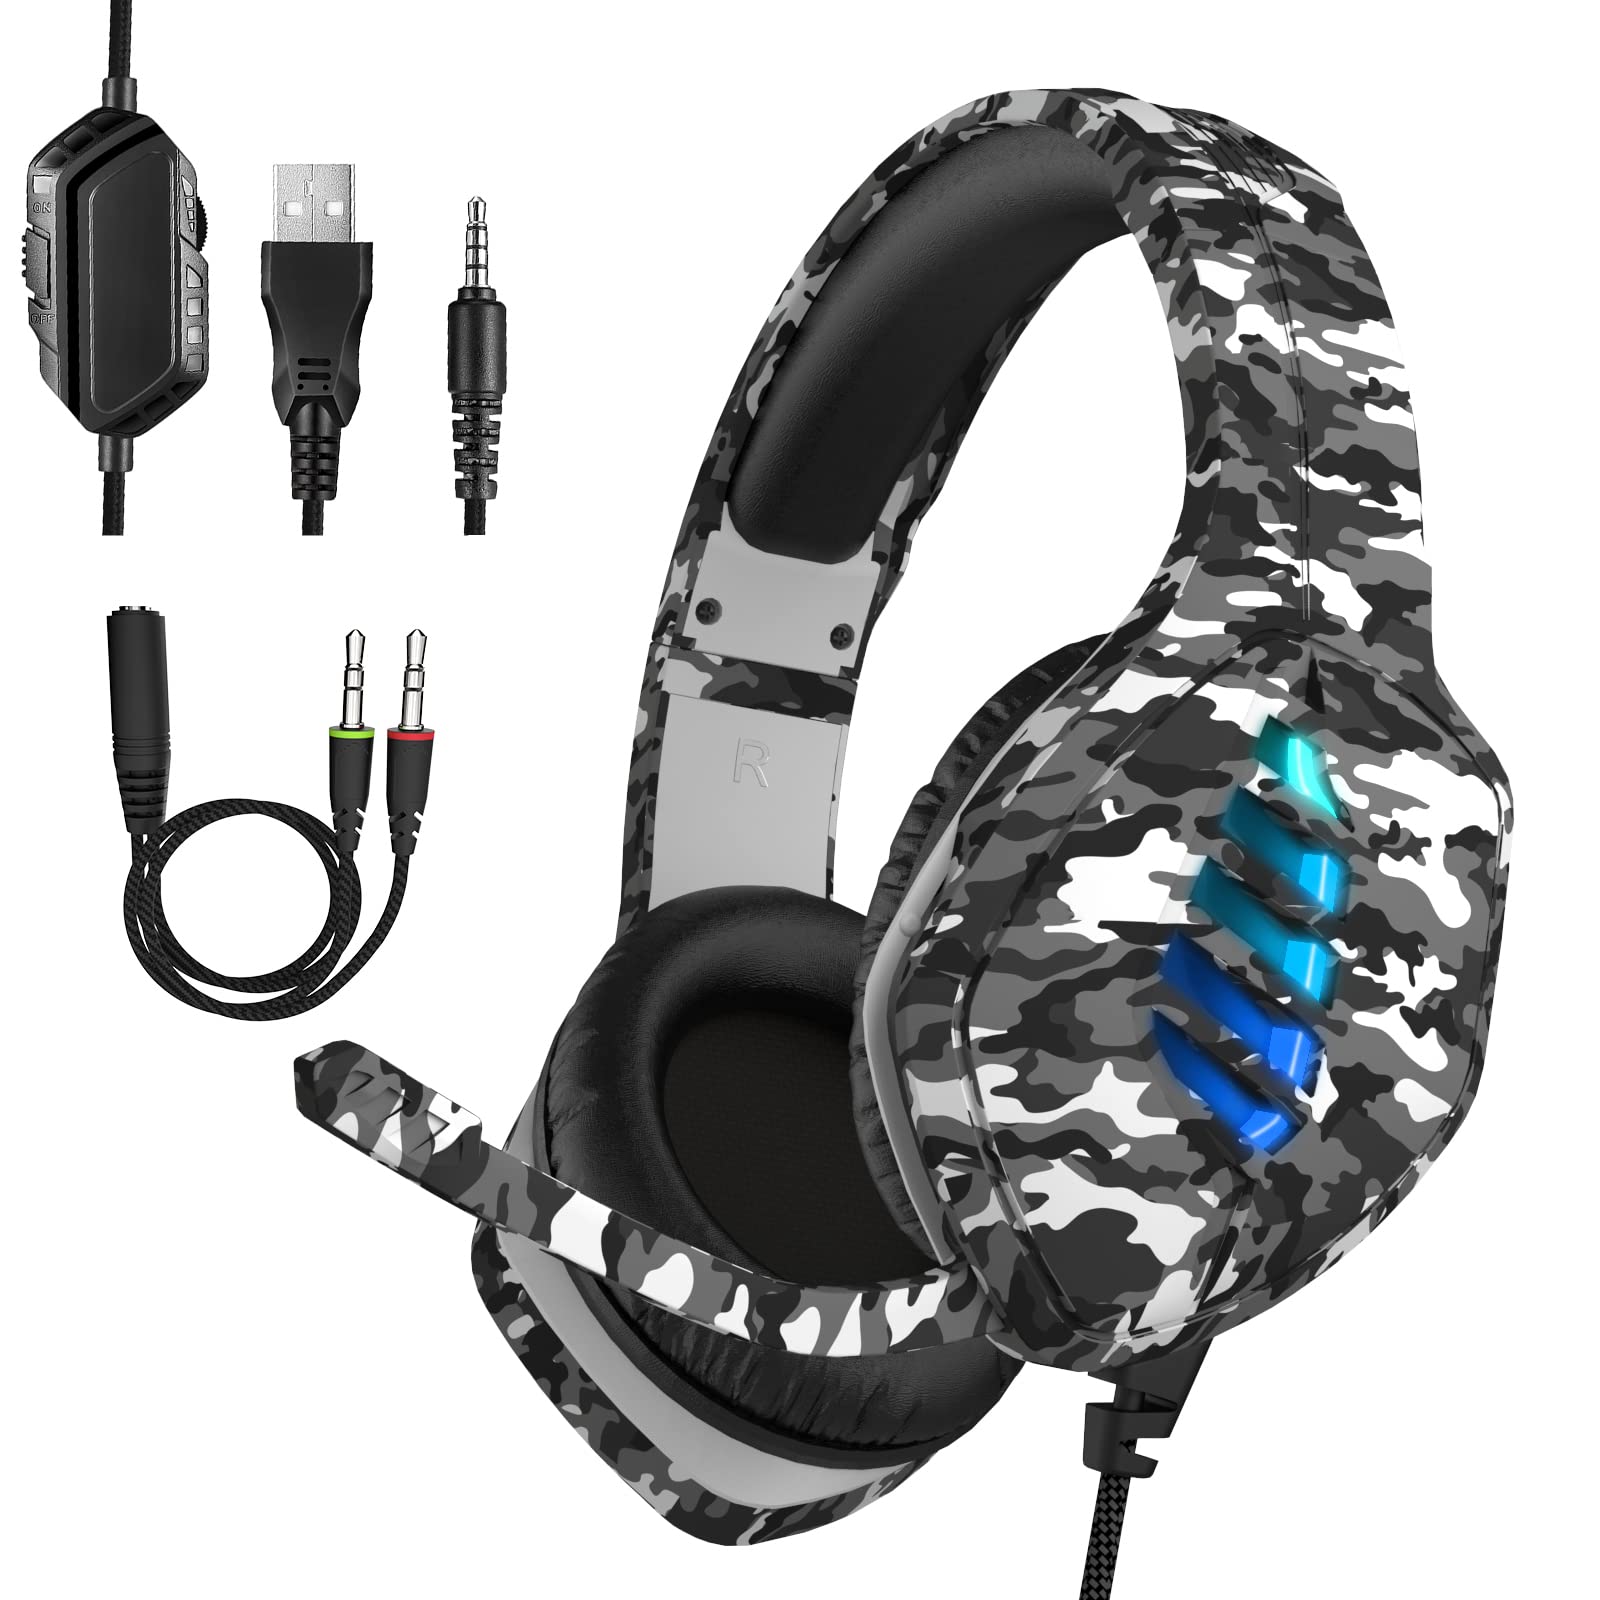 targeal Gaming Headset with Microphone - for PC, PS4, PS5, Switch, Xbox One, Xbox Series X|S - 3.5mm Jack Gamer Headphone with Noise Canceling Mic - Camo